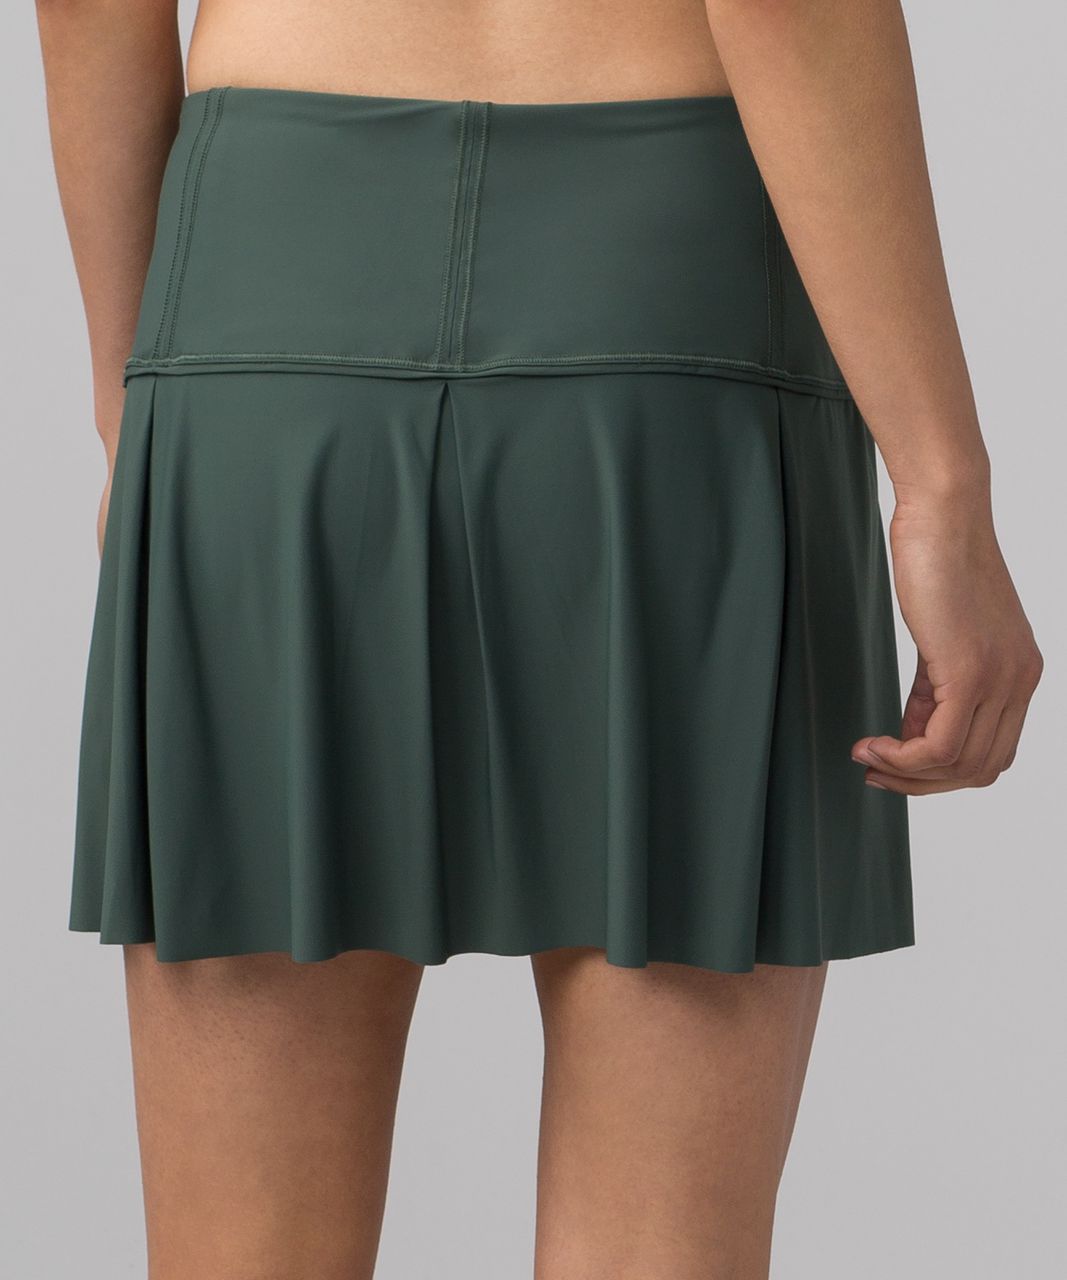 Lululemon Lost In Pace Skirt (Tall) (15") - Dark Forest